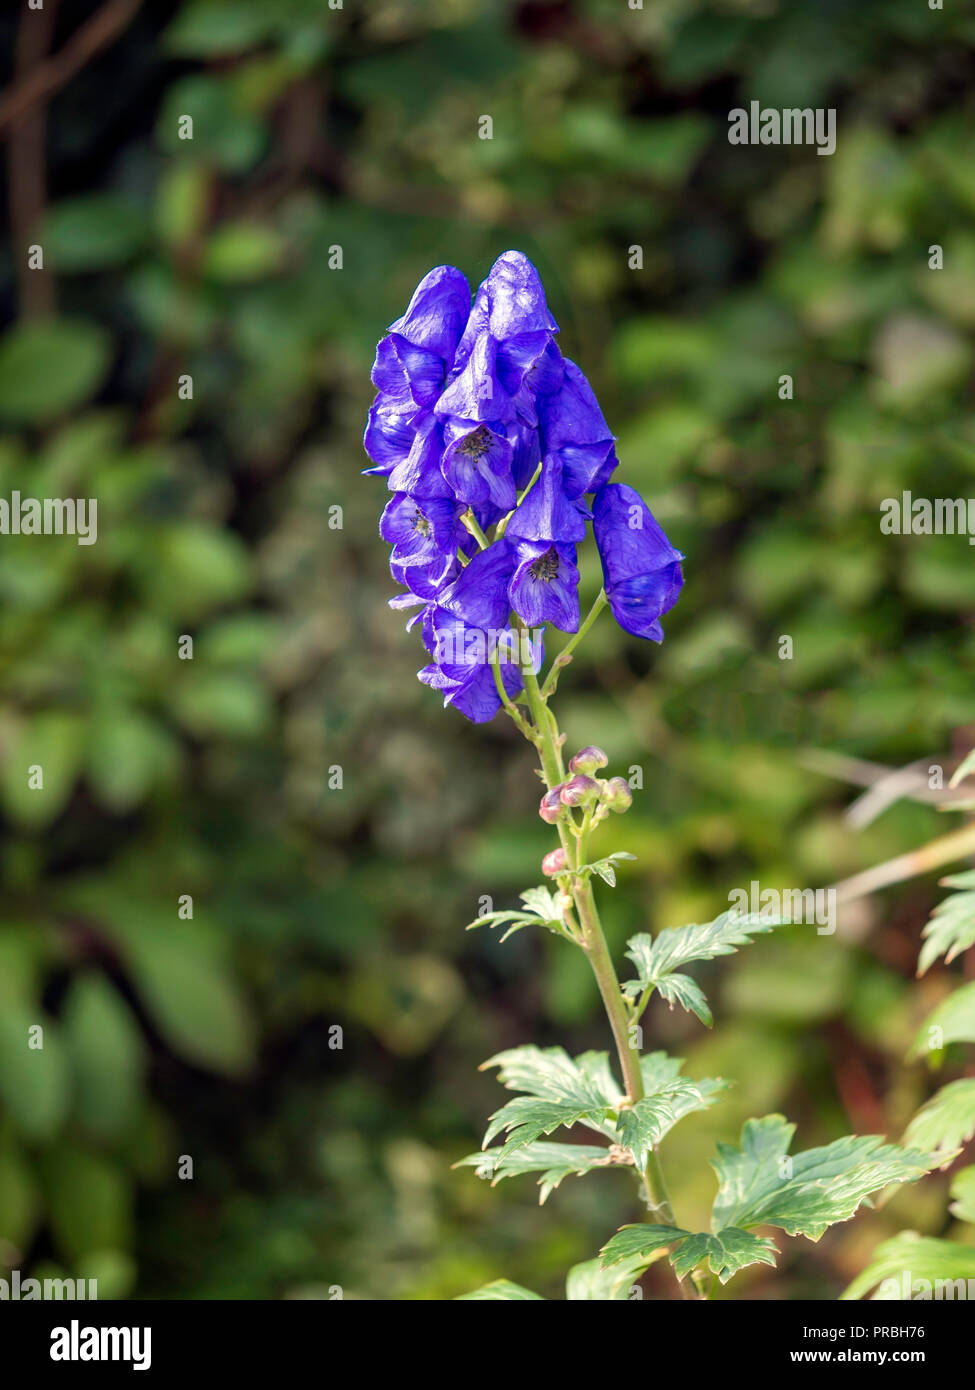 Aconitum or Monks Hood a very poisonous plant with blue bell shaped flowers growing in a urban garden in North Yorkshire England UK Stock Photo